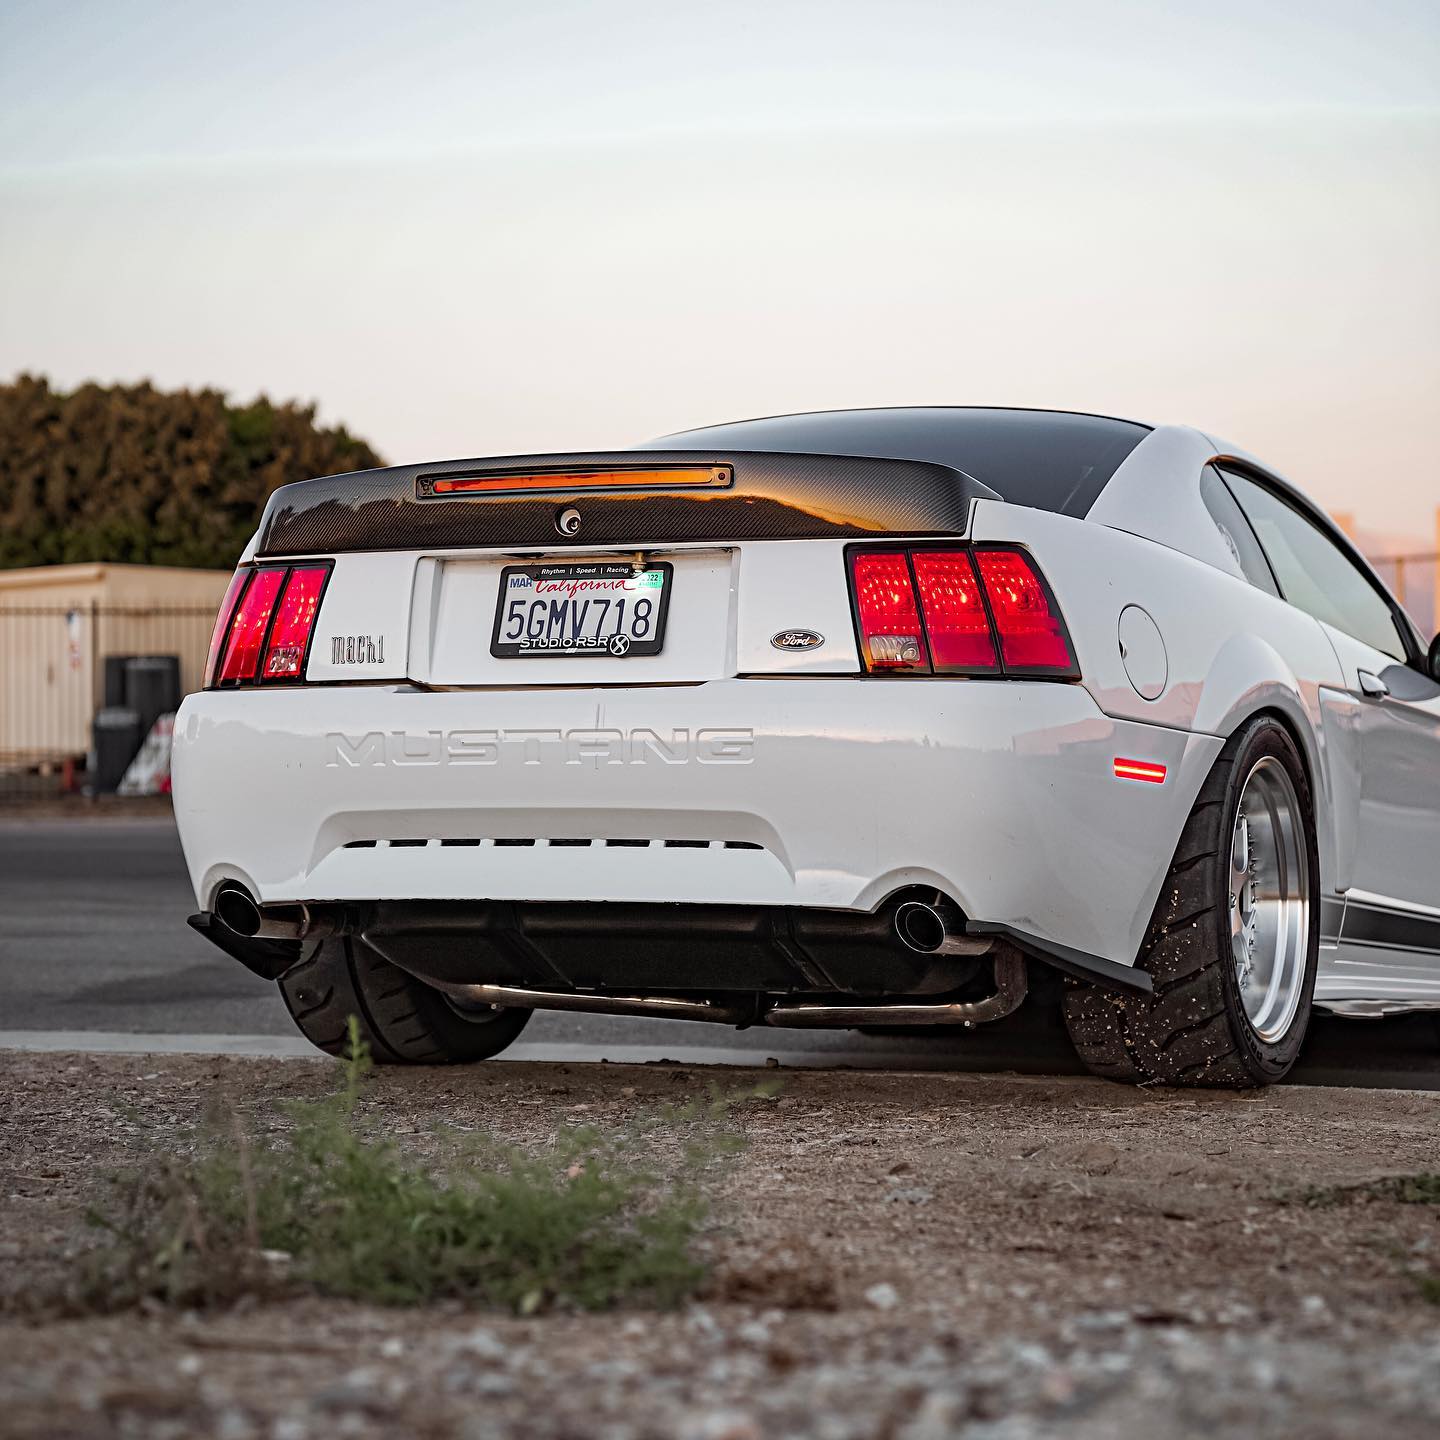 2003 Ford Mustang Mach 1 rear bumper and IRS dual exhaust with BBK headers